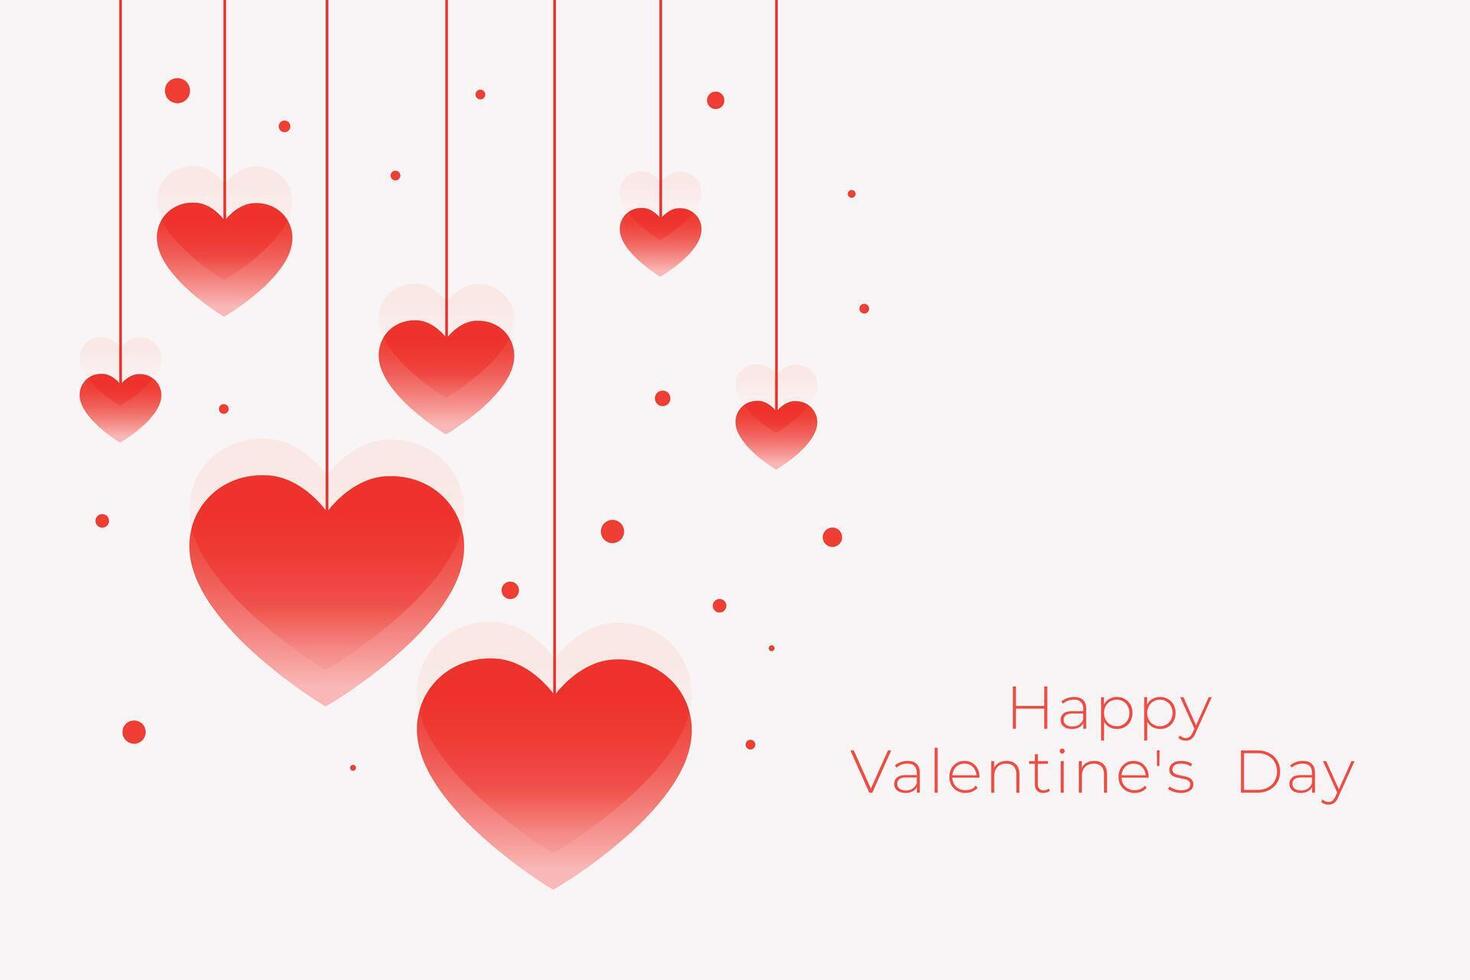 happy valentines day lovely banner with hanging hearts vector